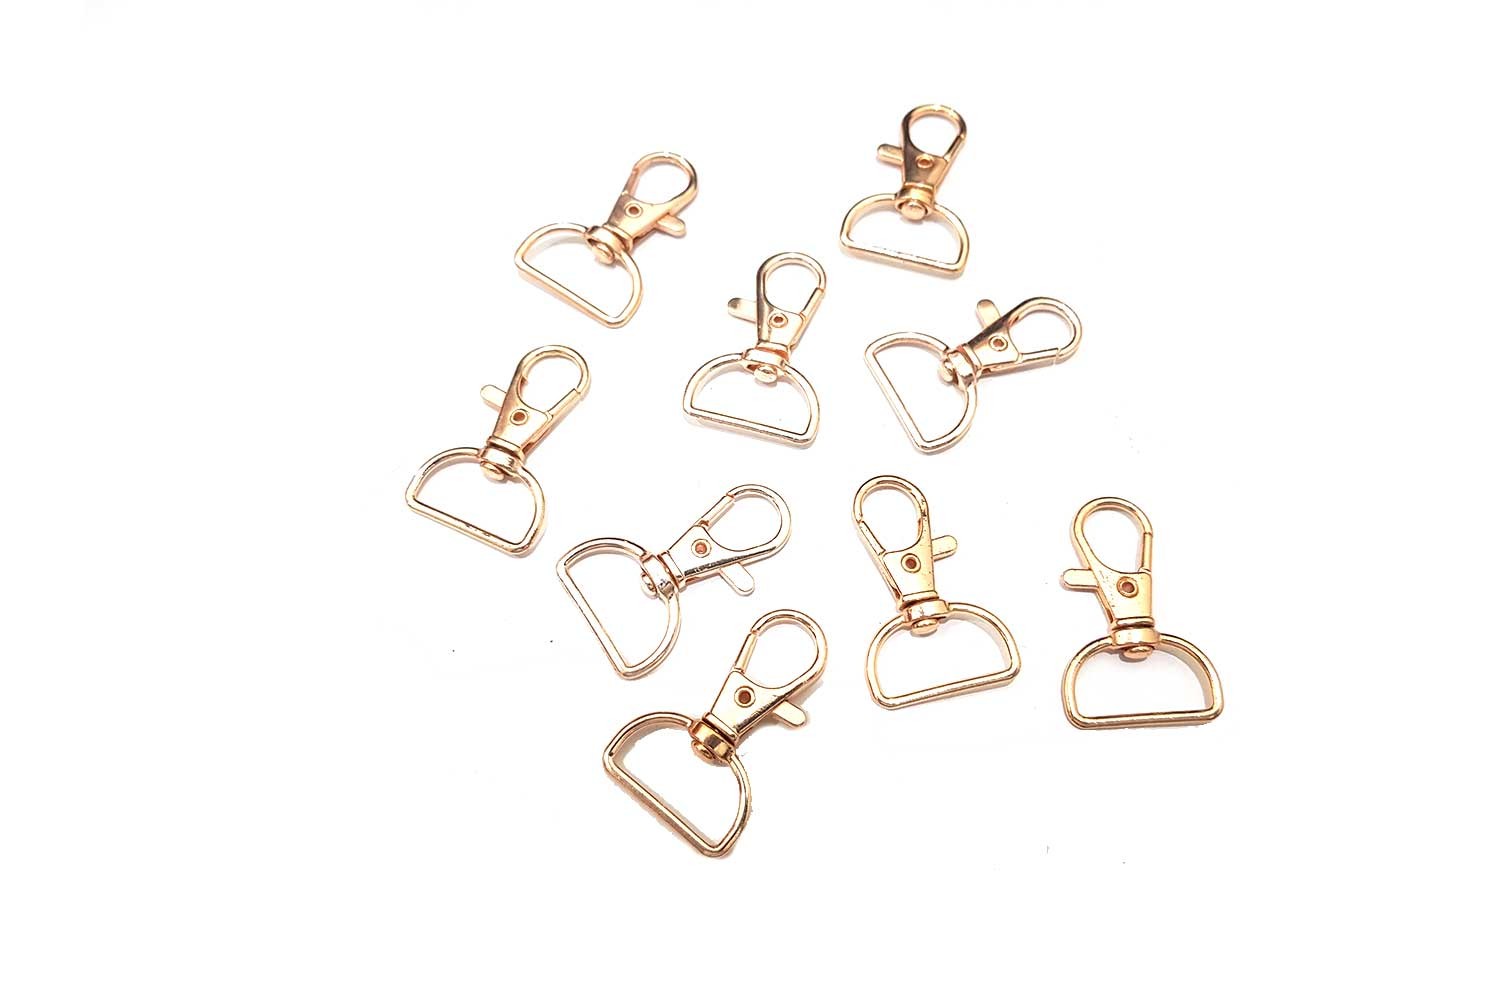 Golden Lobster Clasp Swivel Hooks with D Rings webbing bag strap hardware  connector, Carabiner hook for bags, keychains etc. - Designers Need